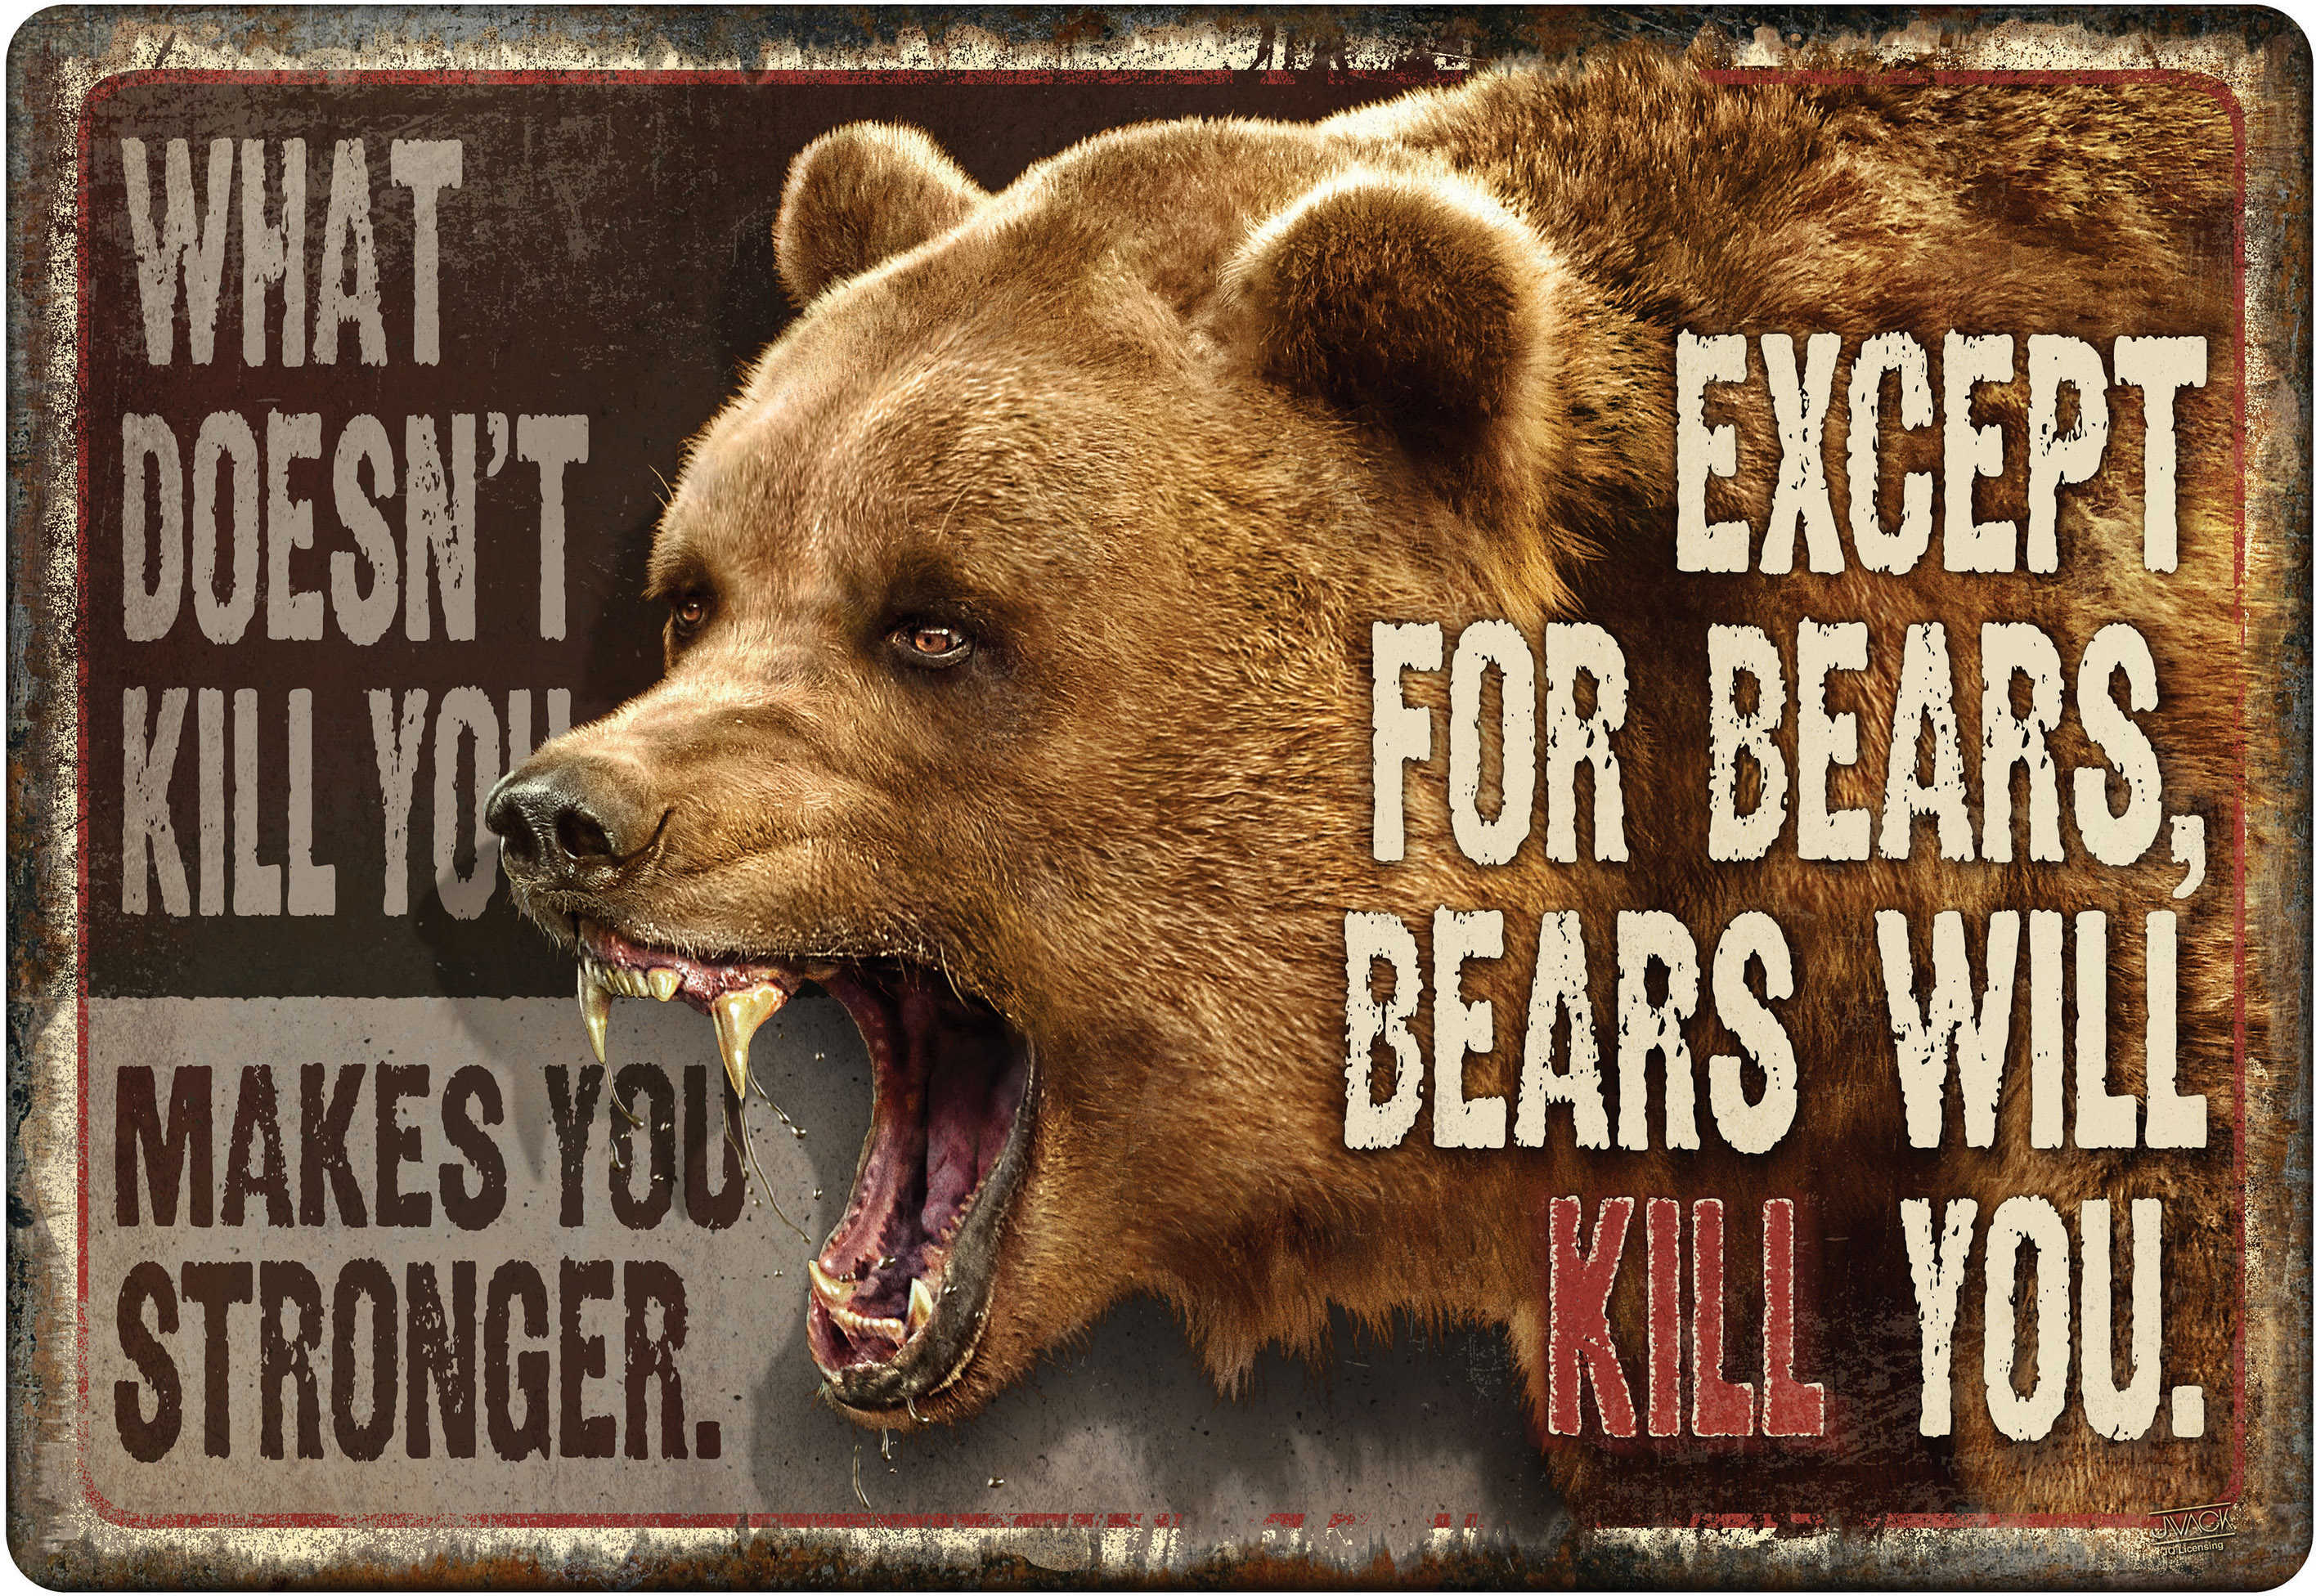 Rivers Edge Products 12" x 17" Tin Sign Bears Will Kill You Md: 1457